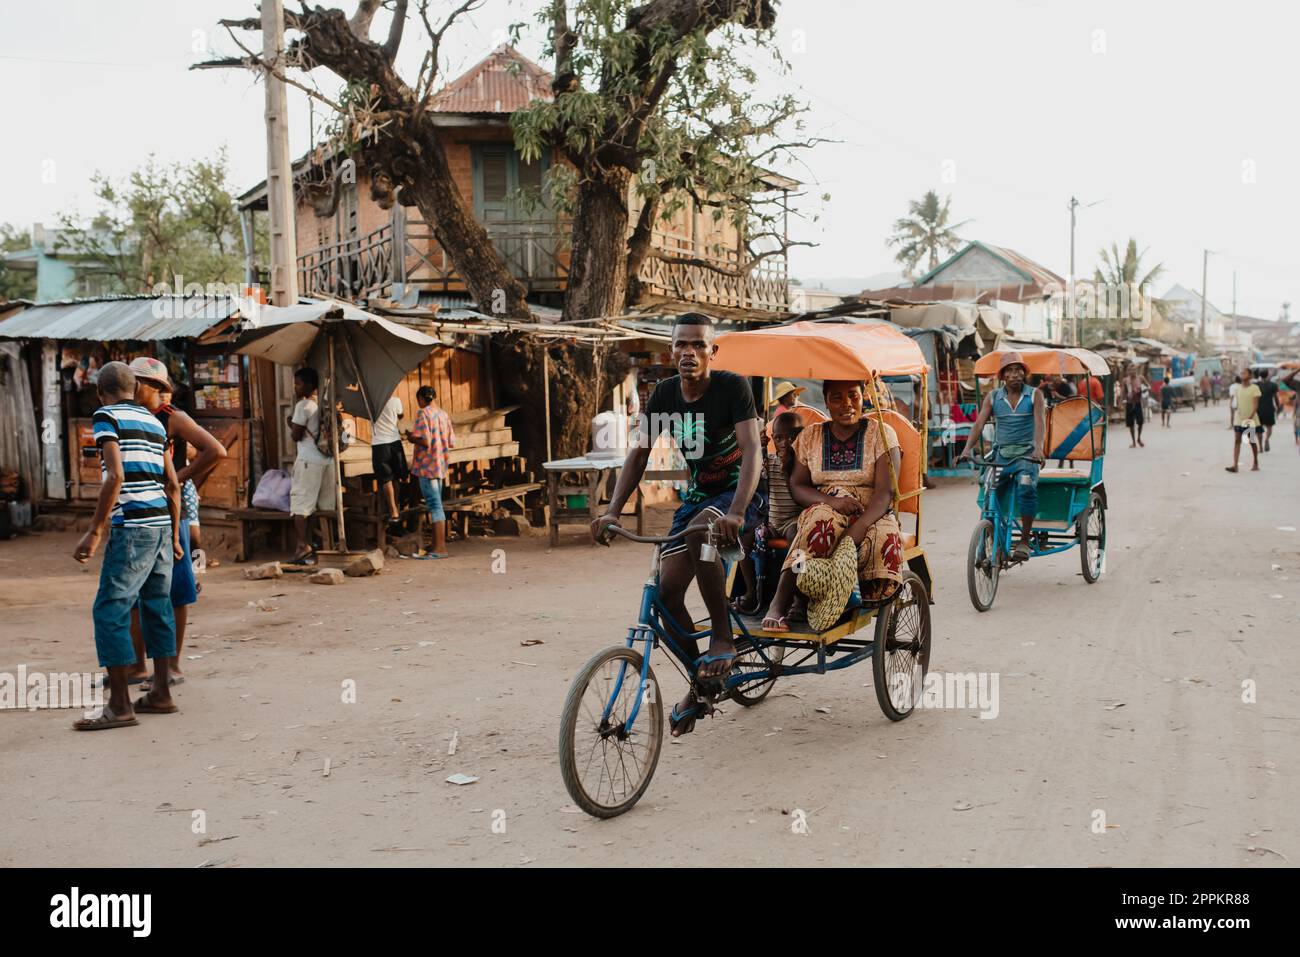 Traditional rickshaw bicycle with Malagasy people on the street of Miandrivazo, one of the ways to earn money. Everyday life on the street of Madagascar. Stock Photo